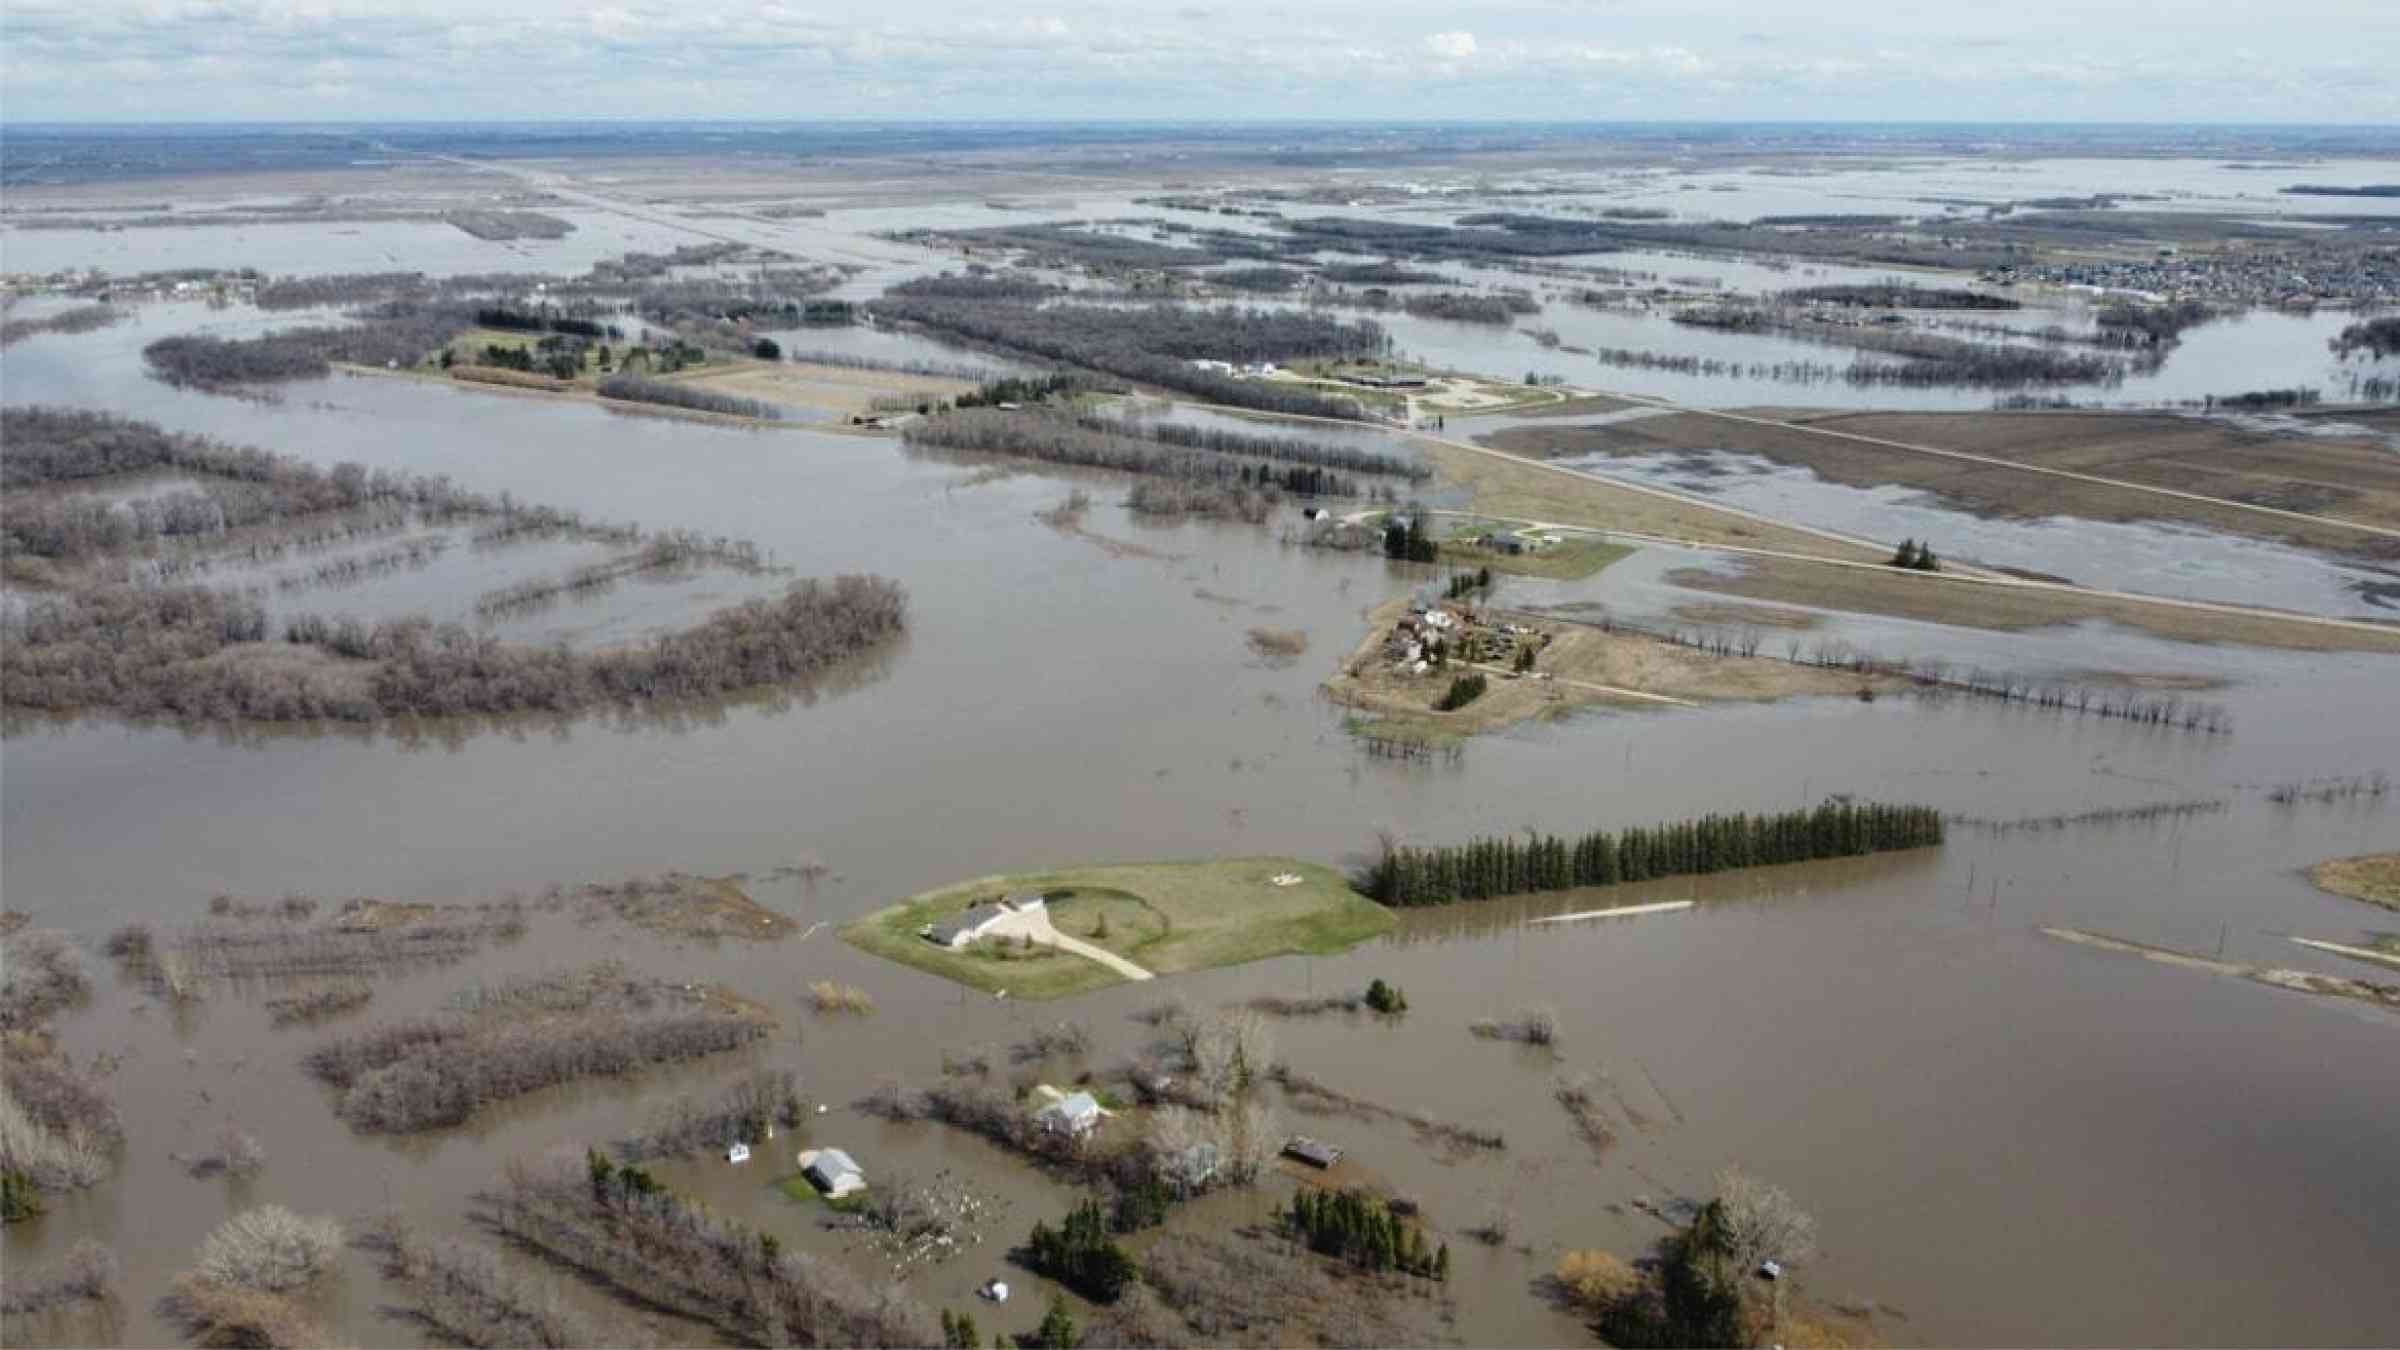 Wide swathes of land is flooded in Manitoba, Canada